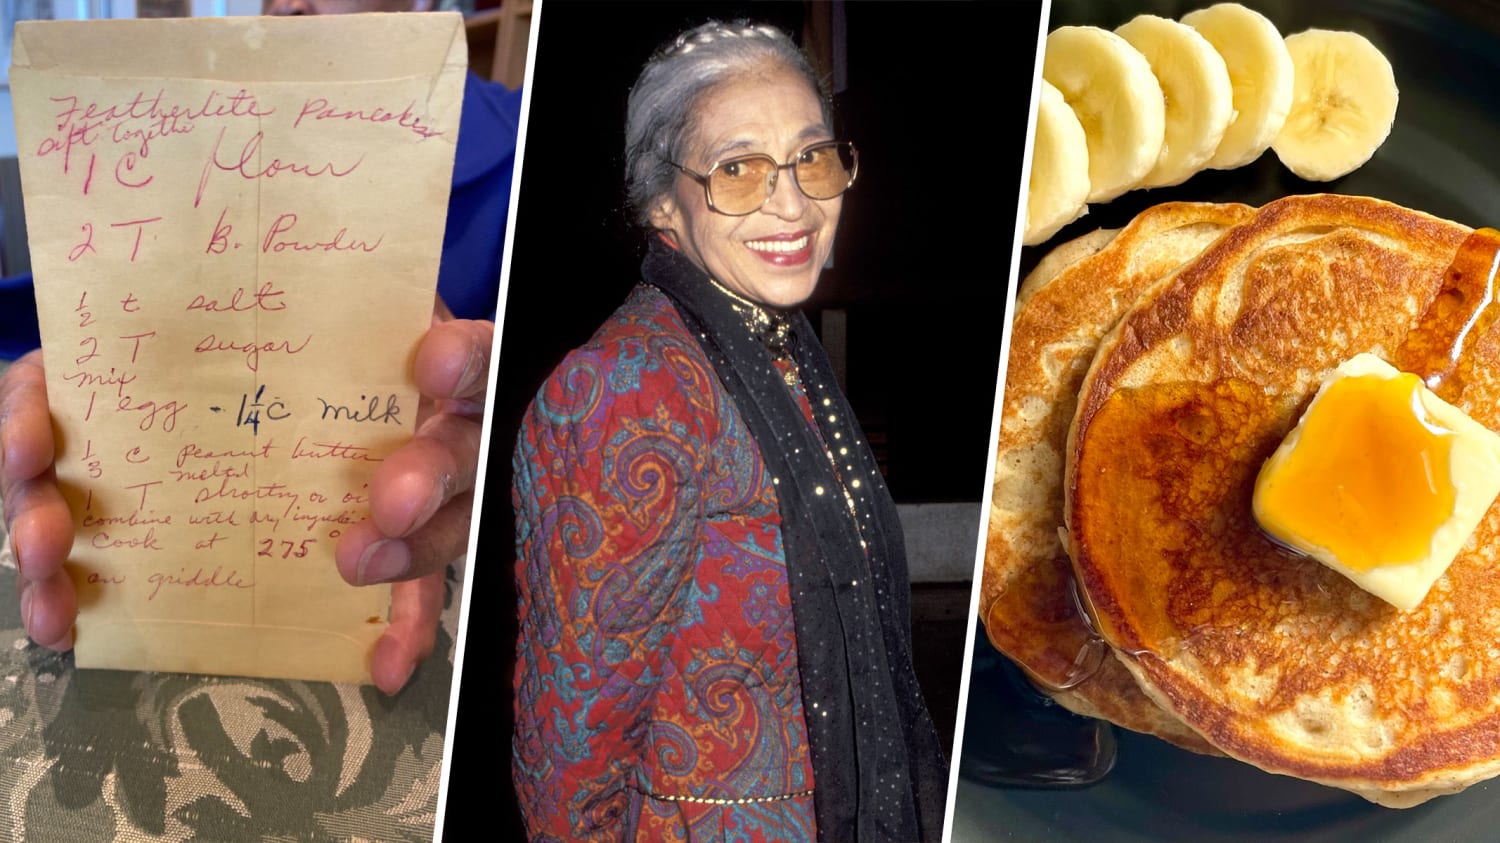 The Library of Congress posted Rosa Parks' 'Featherlite' pancake recipe, so I tried it  